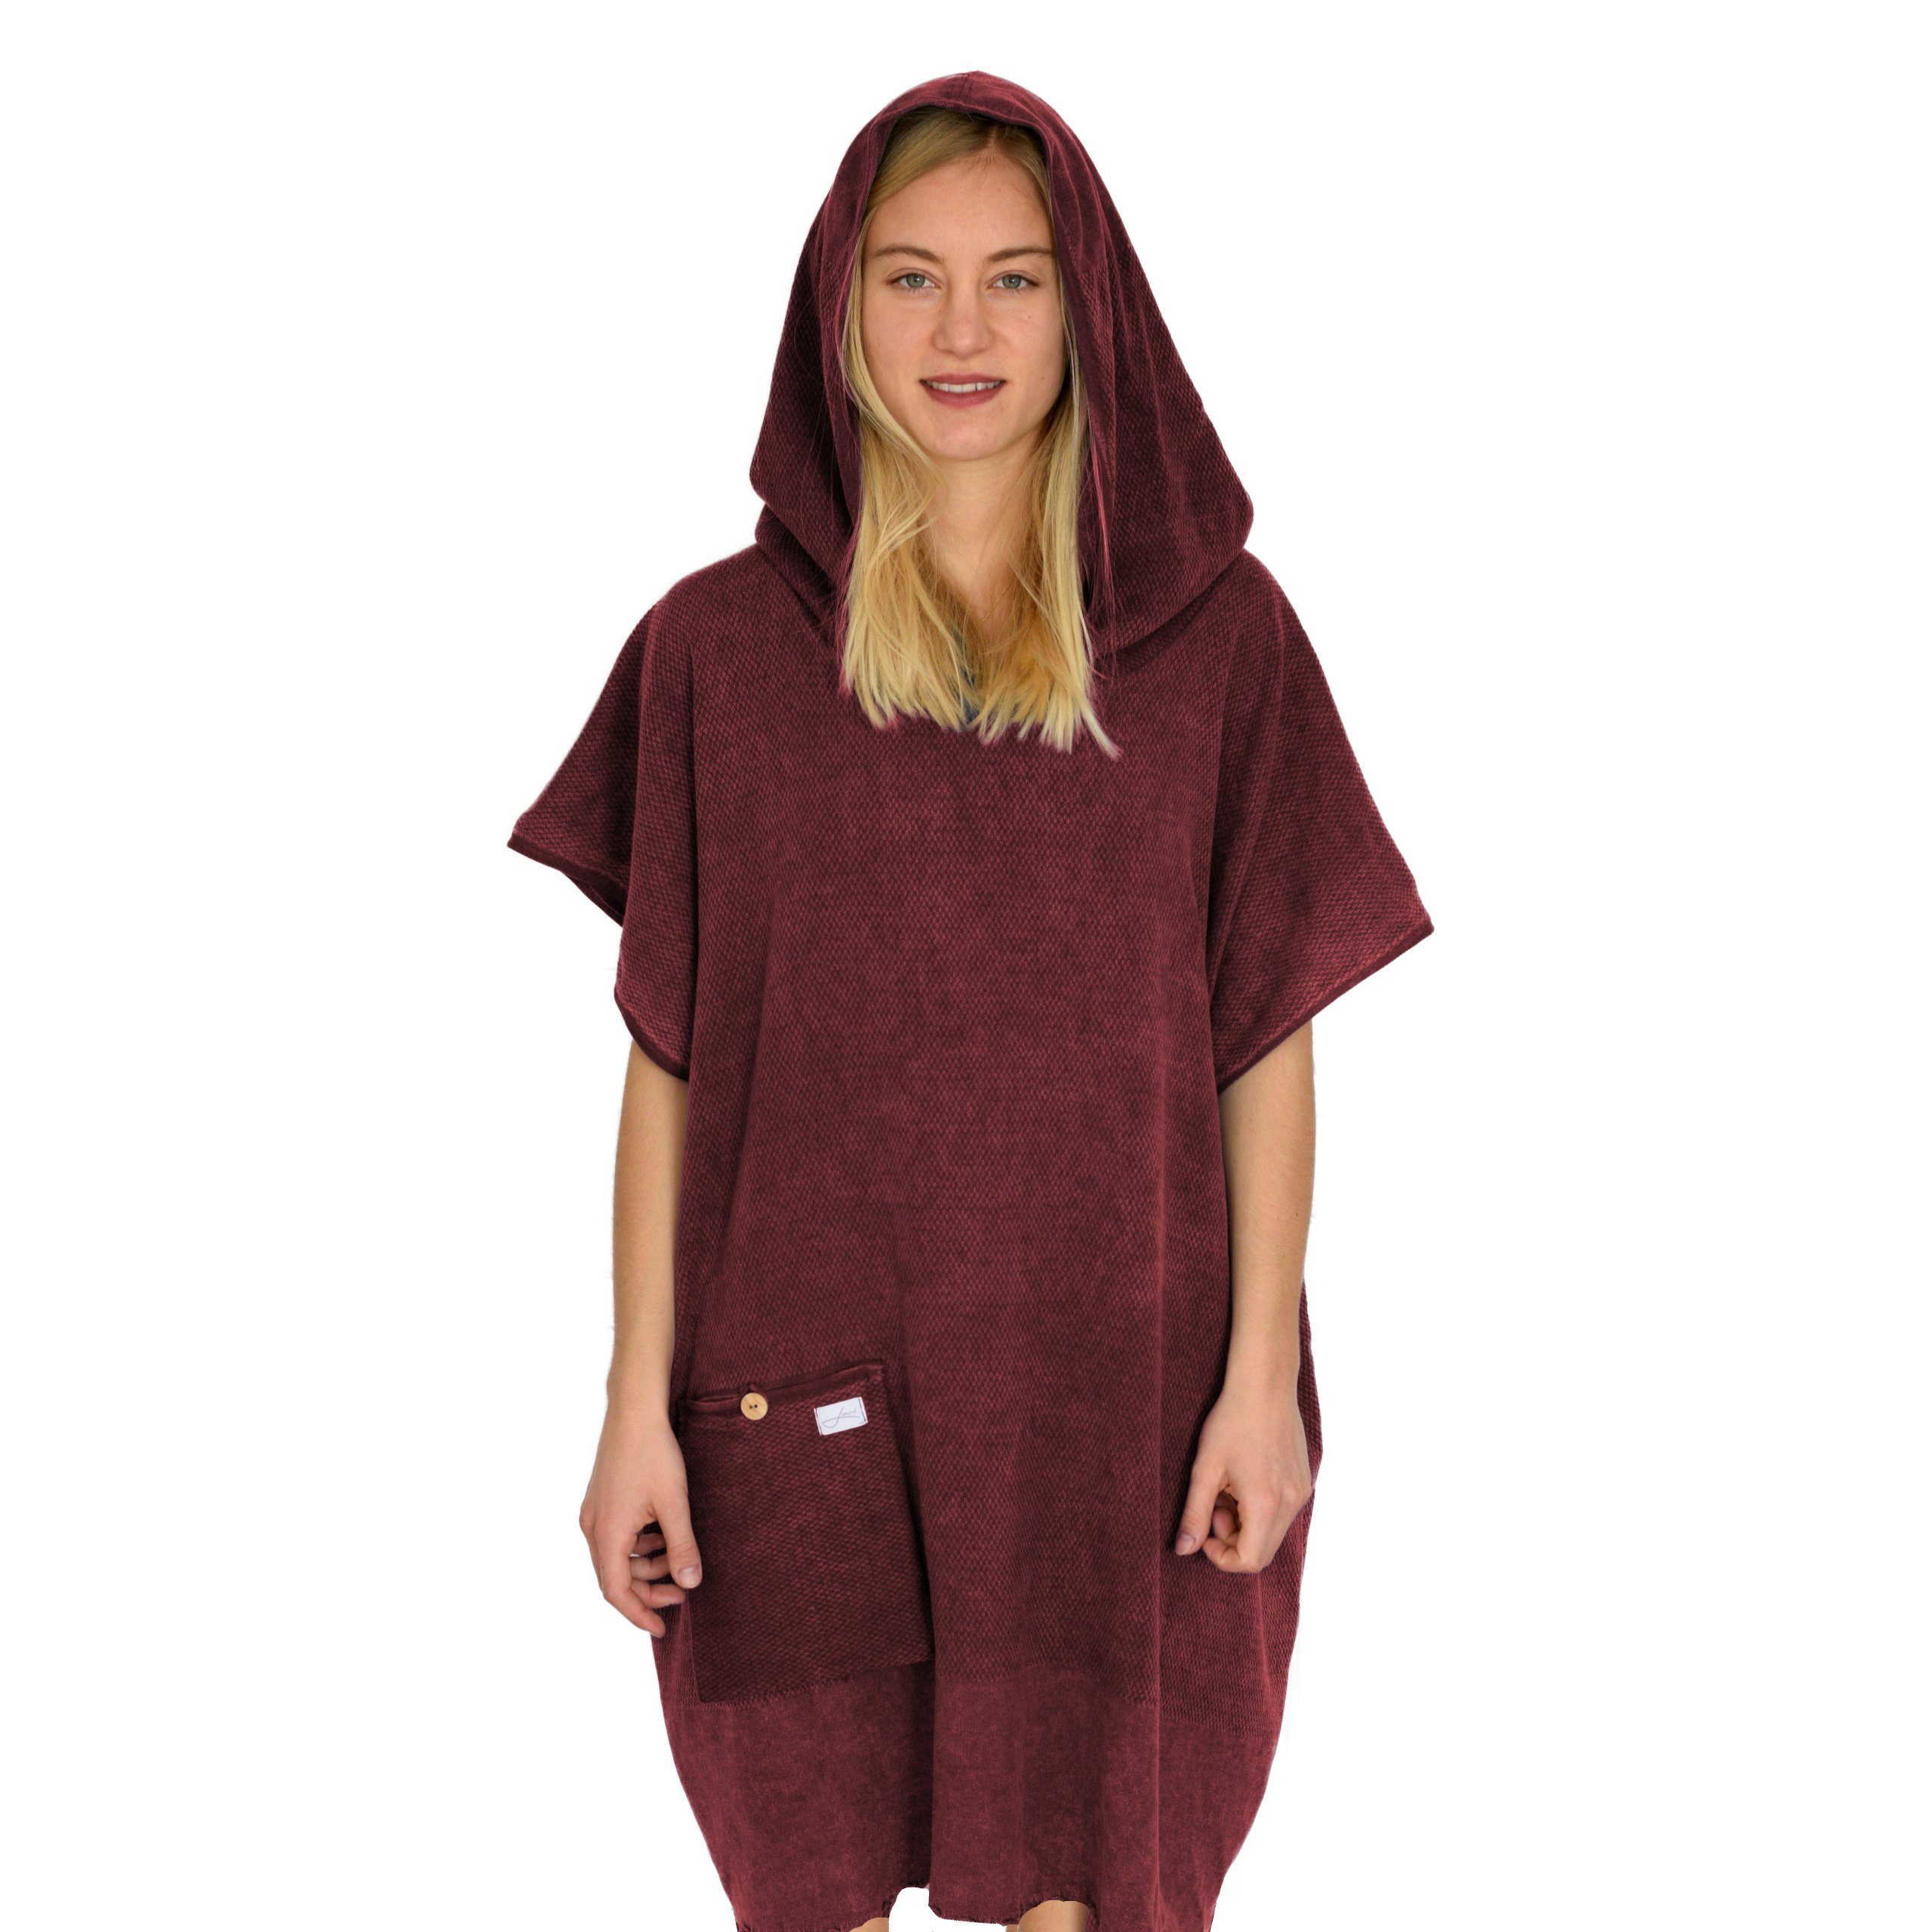 Badeponcho Germany burgundy Made schnell trocken), (leicht & Badeponcho in Kapuze Surfponcho Lou-i